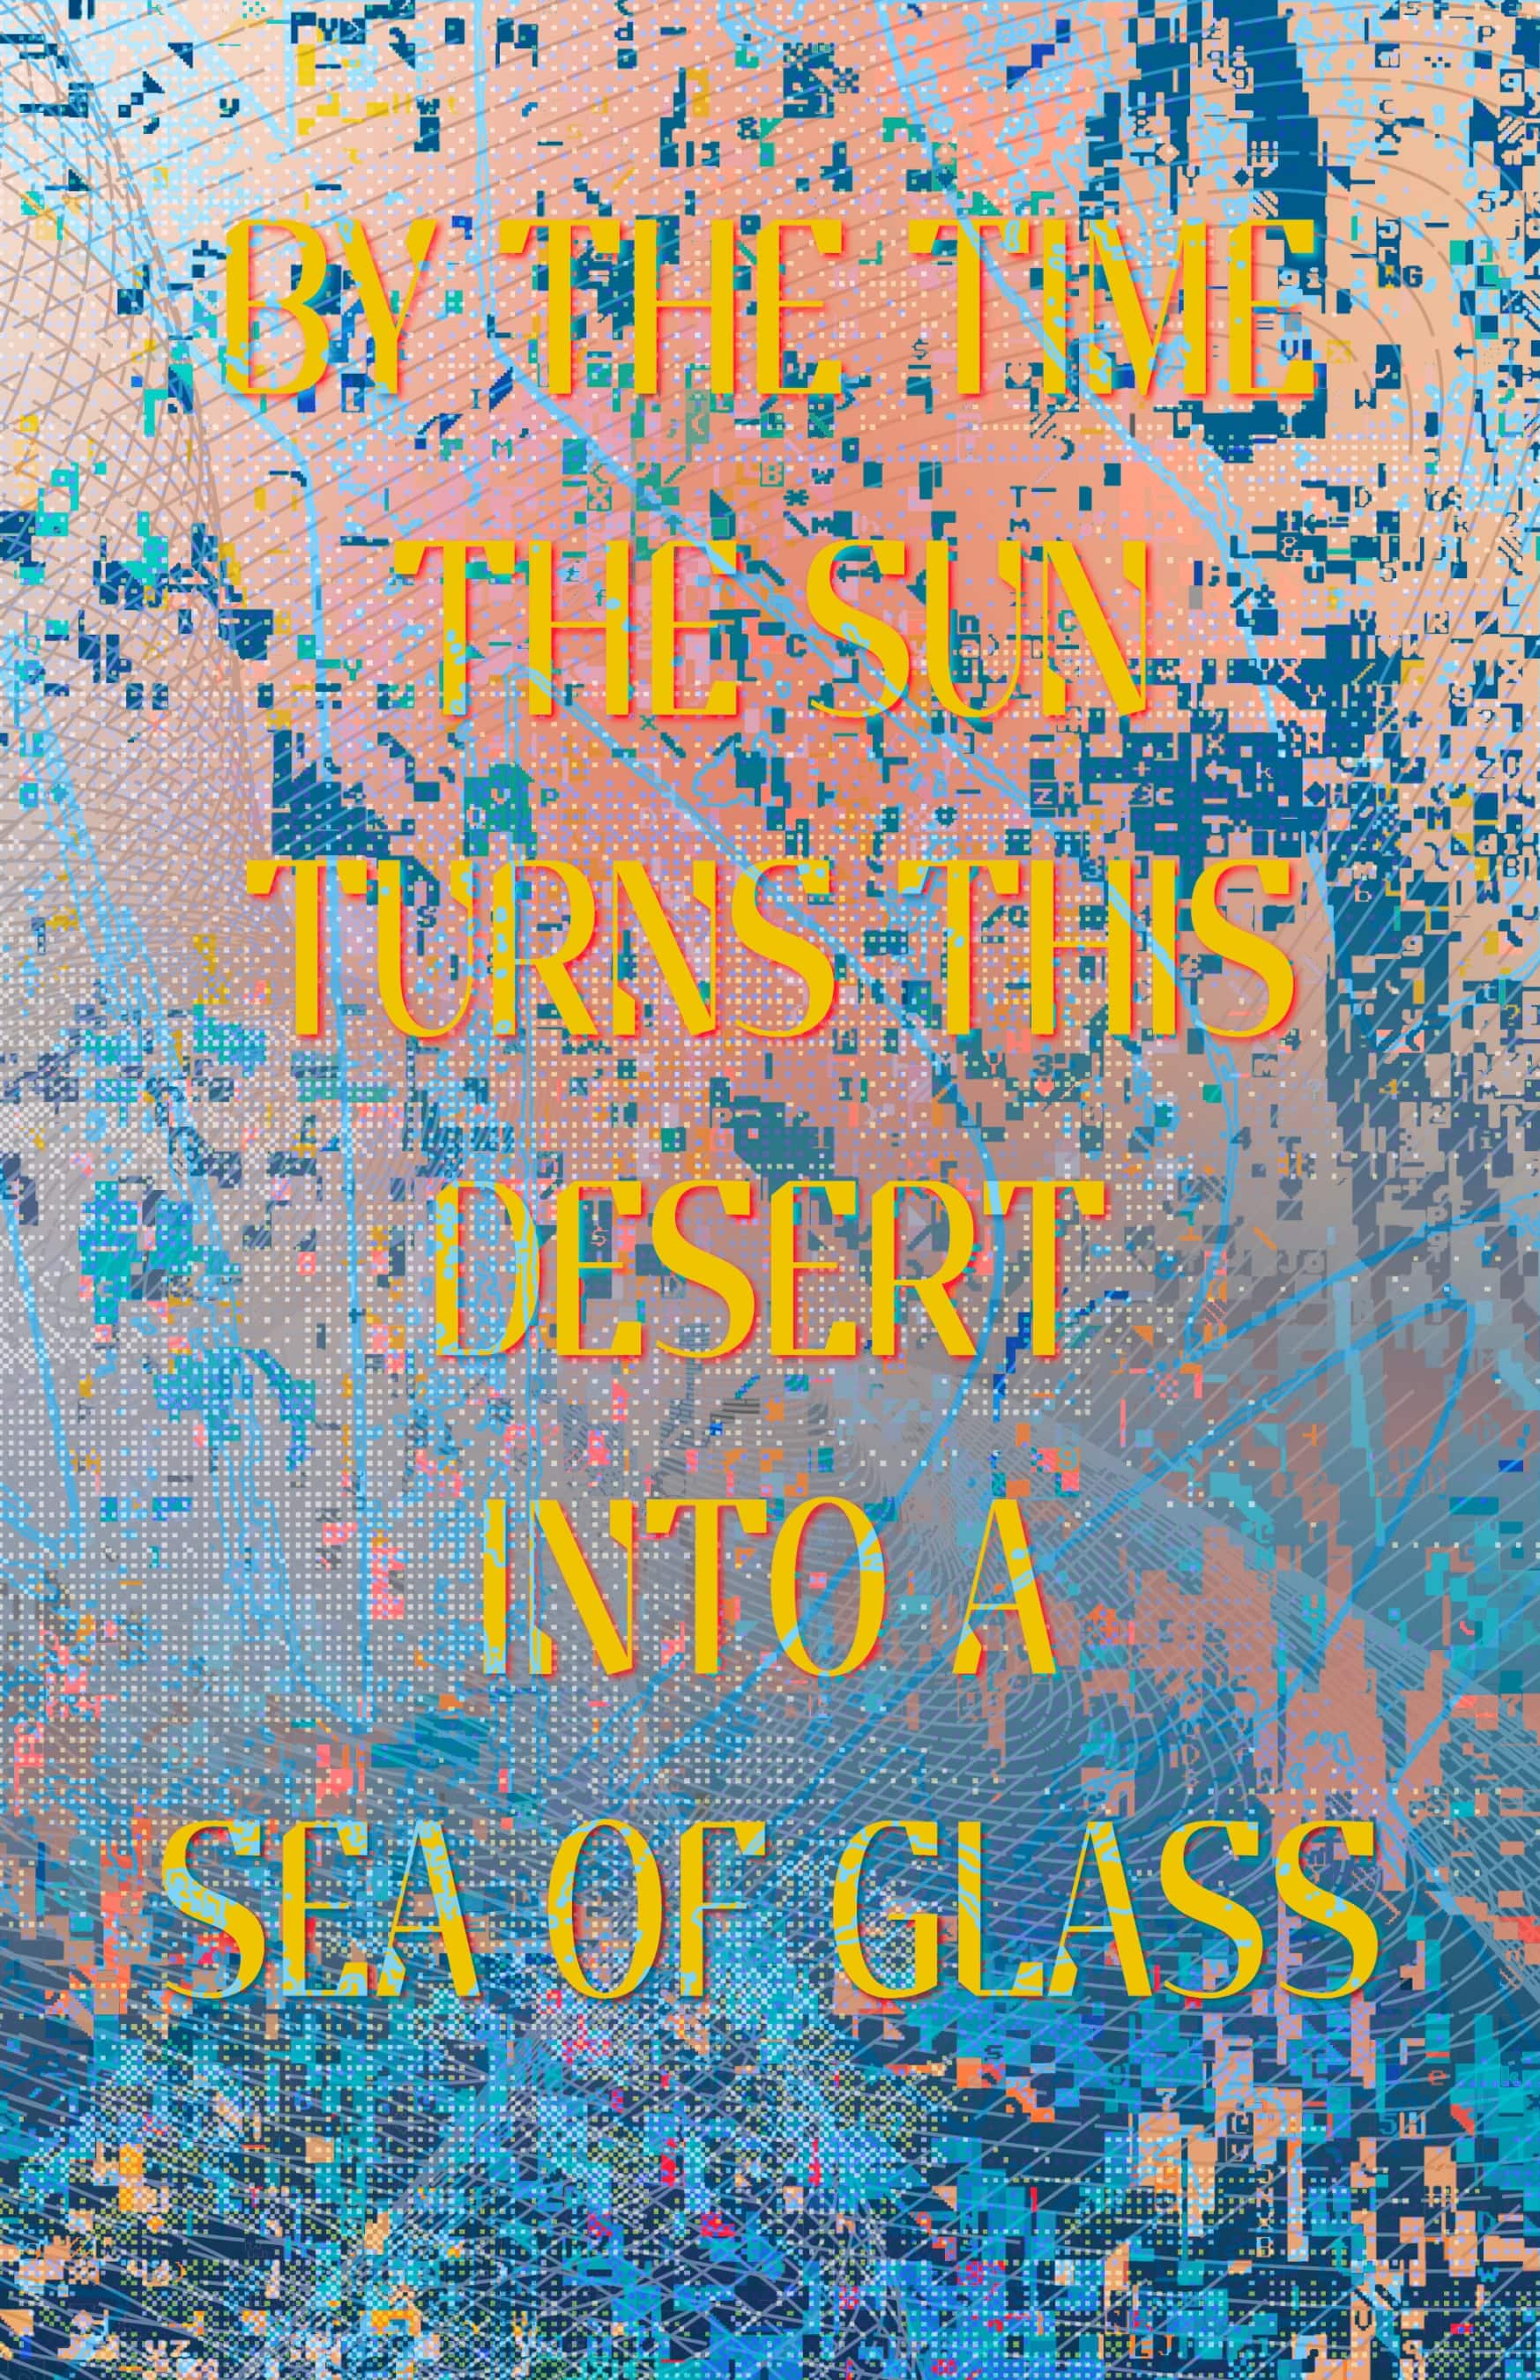 glitch art poster reading, by the time the sun turns this desert into a sea of glass